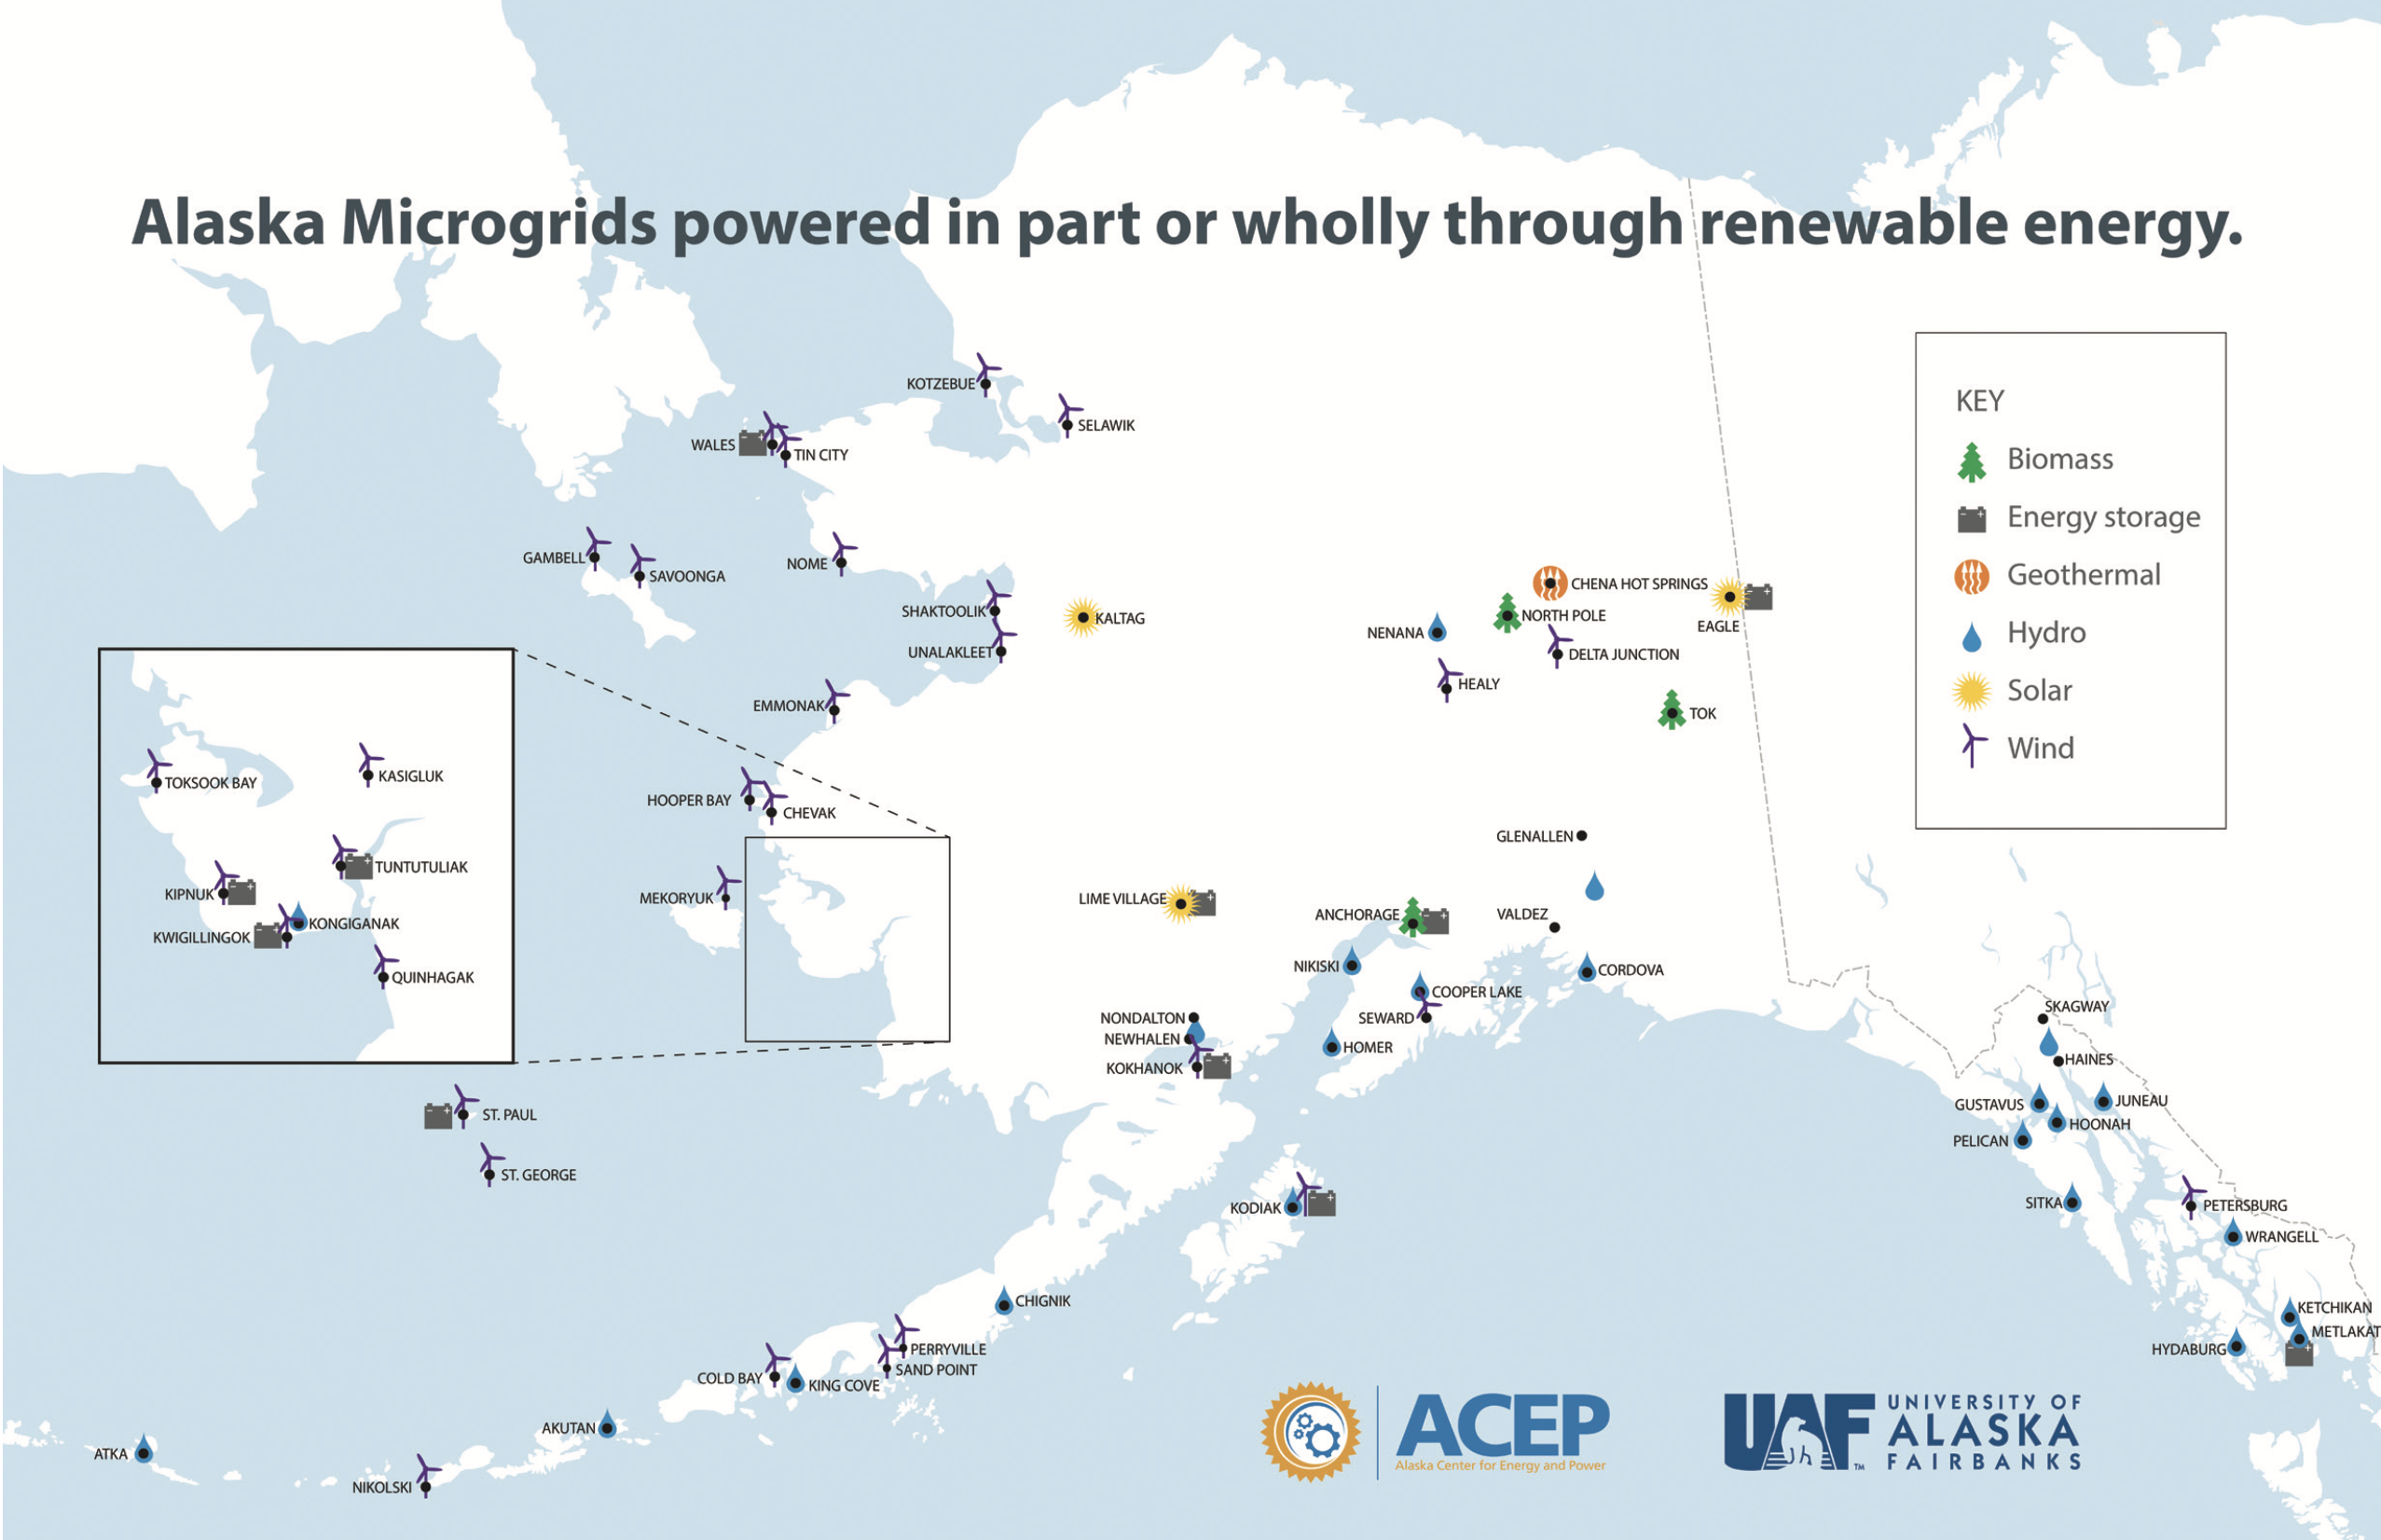 The image shows renewable energy sources across the vast state of Alaska.